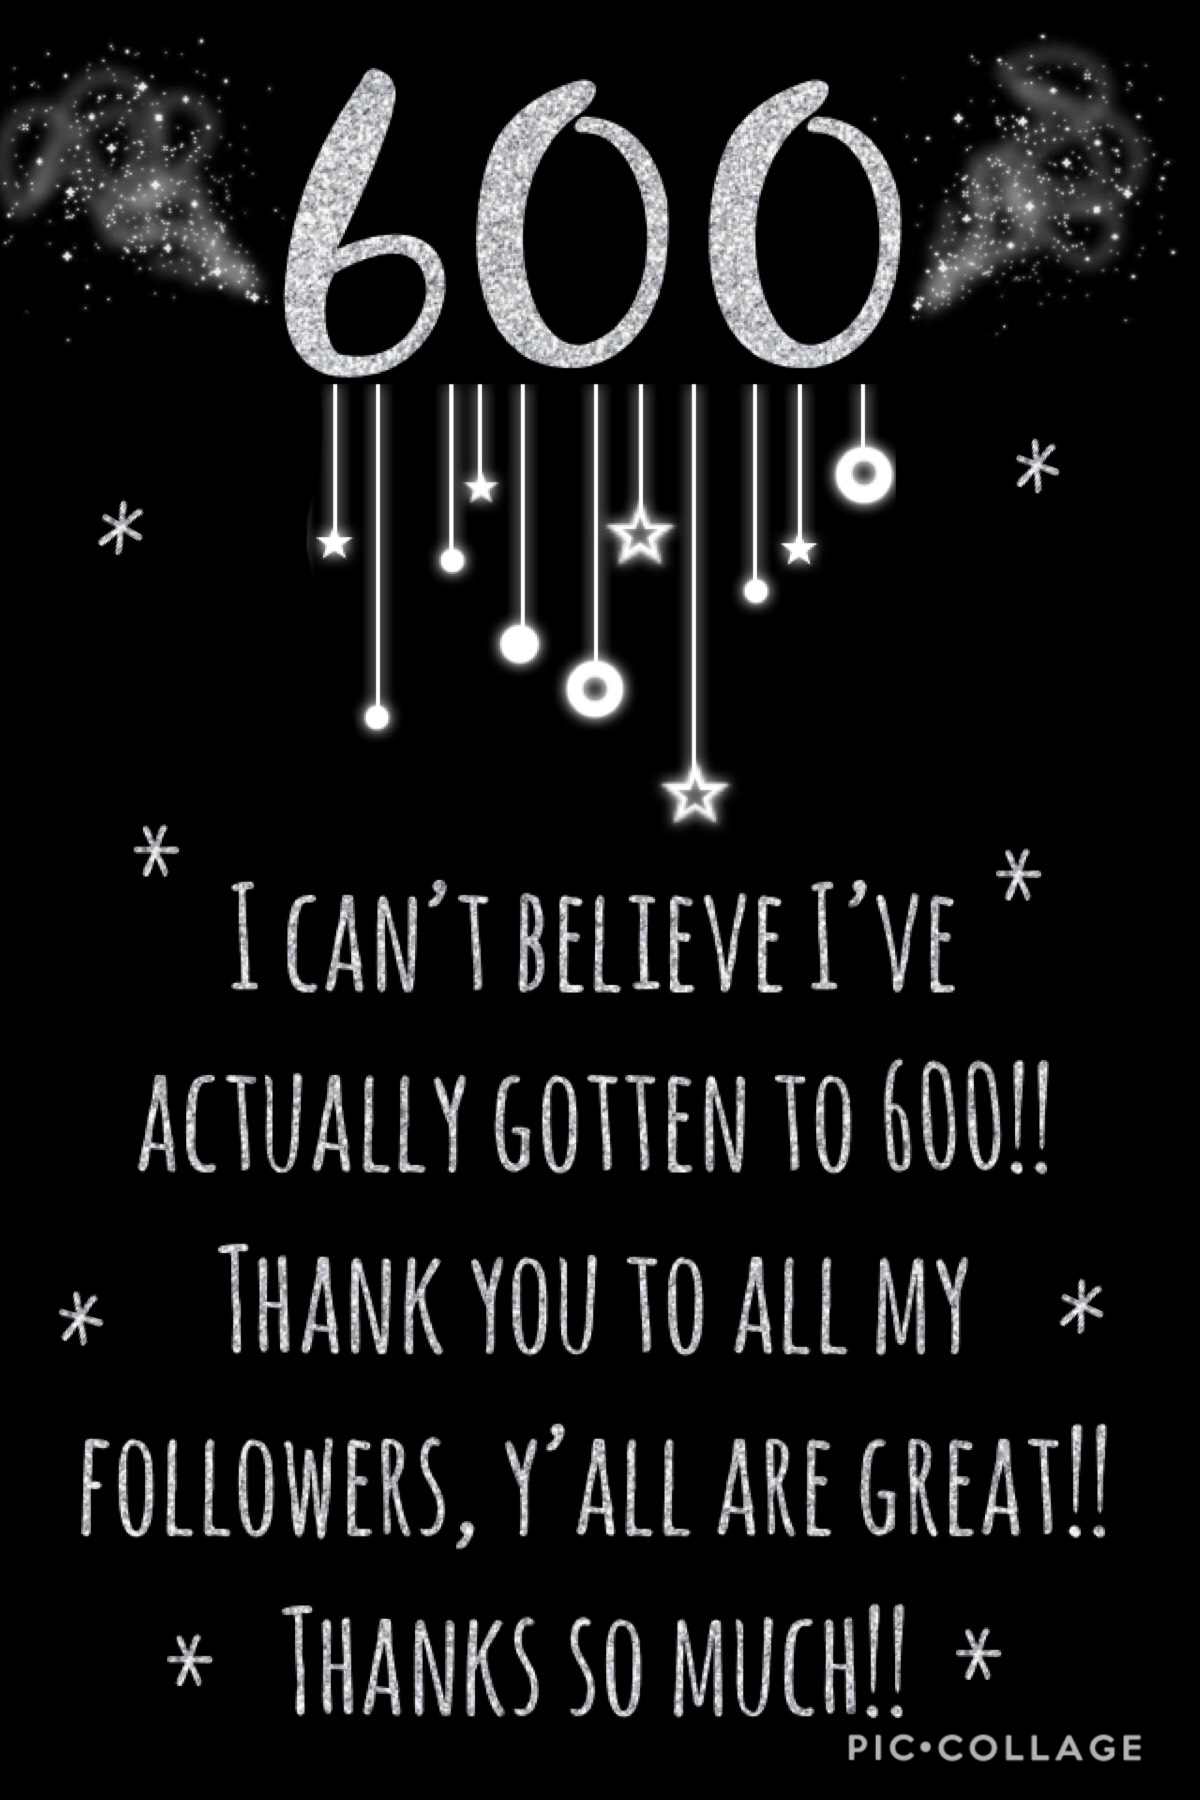 Wow!! 600!! I never thought I would get here! Thanks so much!!